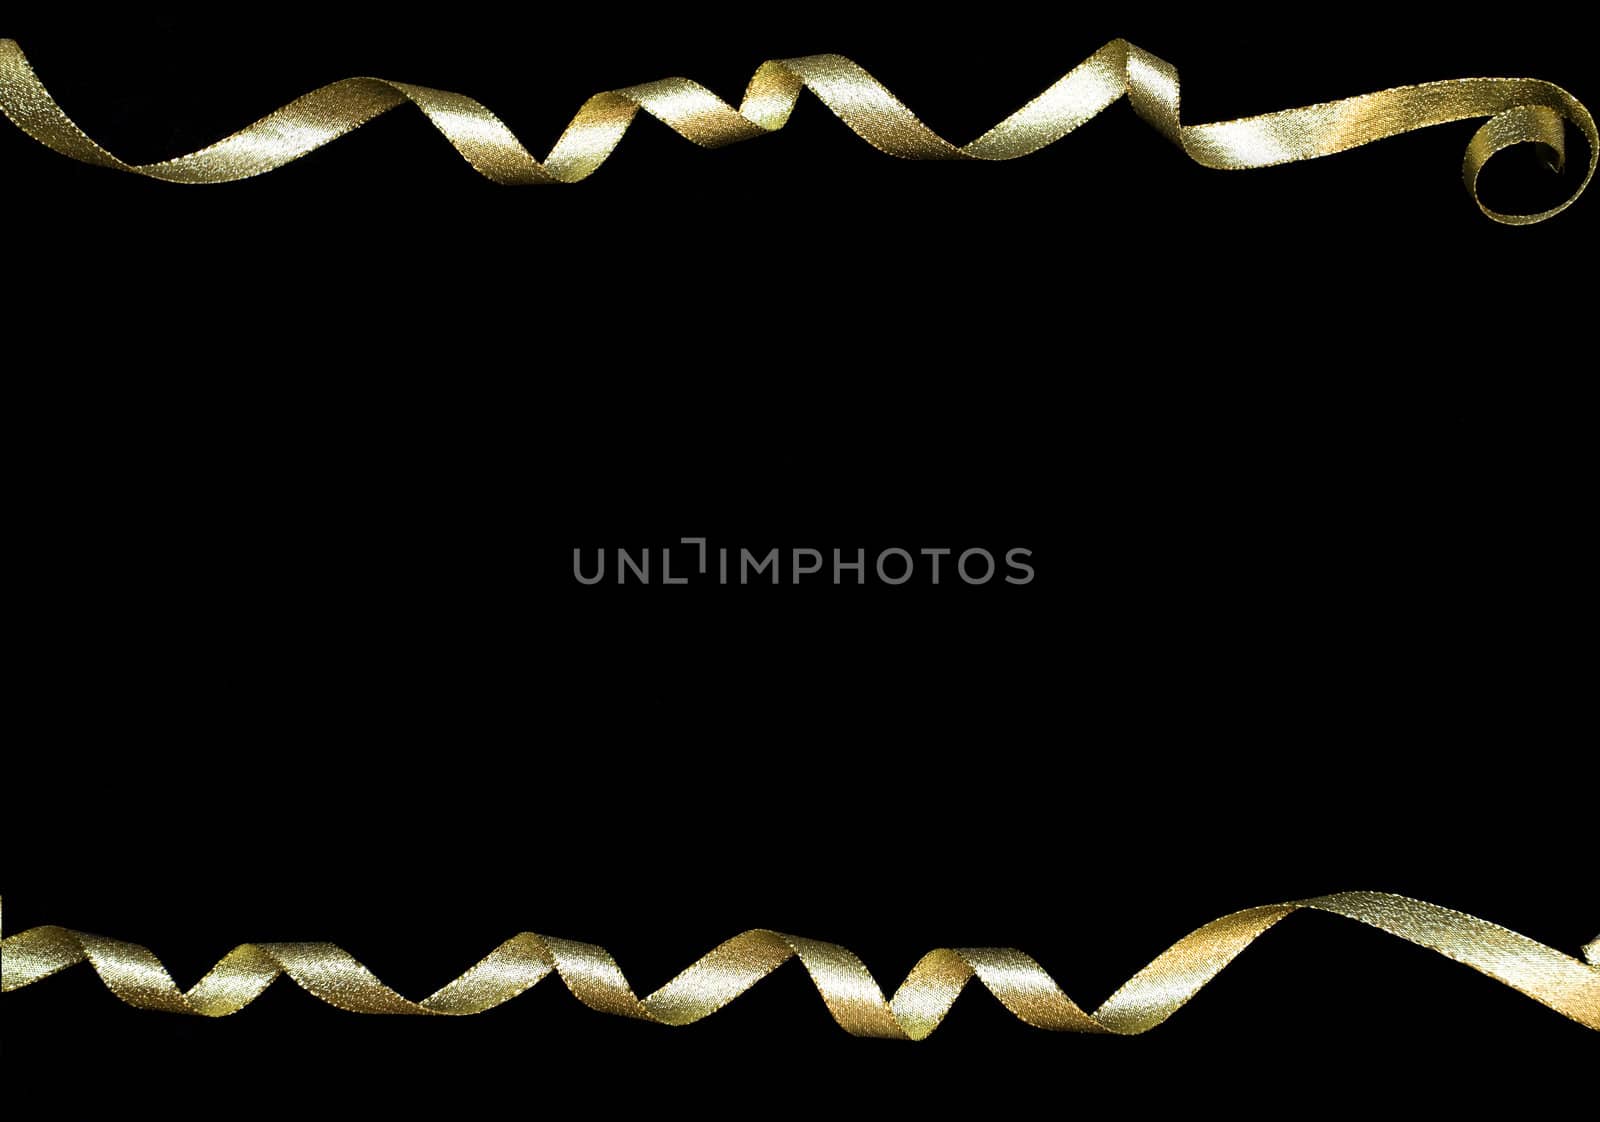 Gold curly ribbons on black